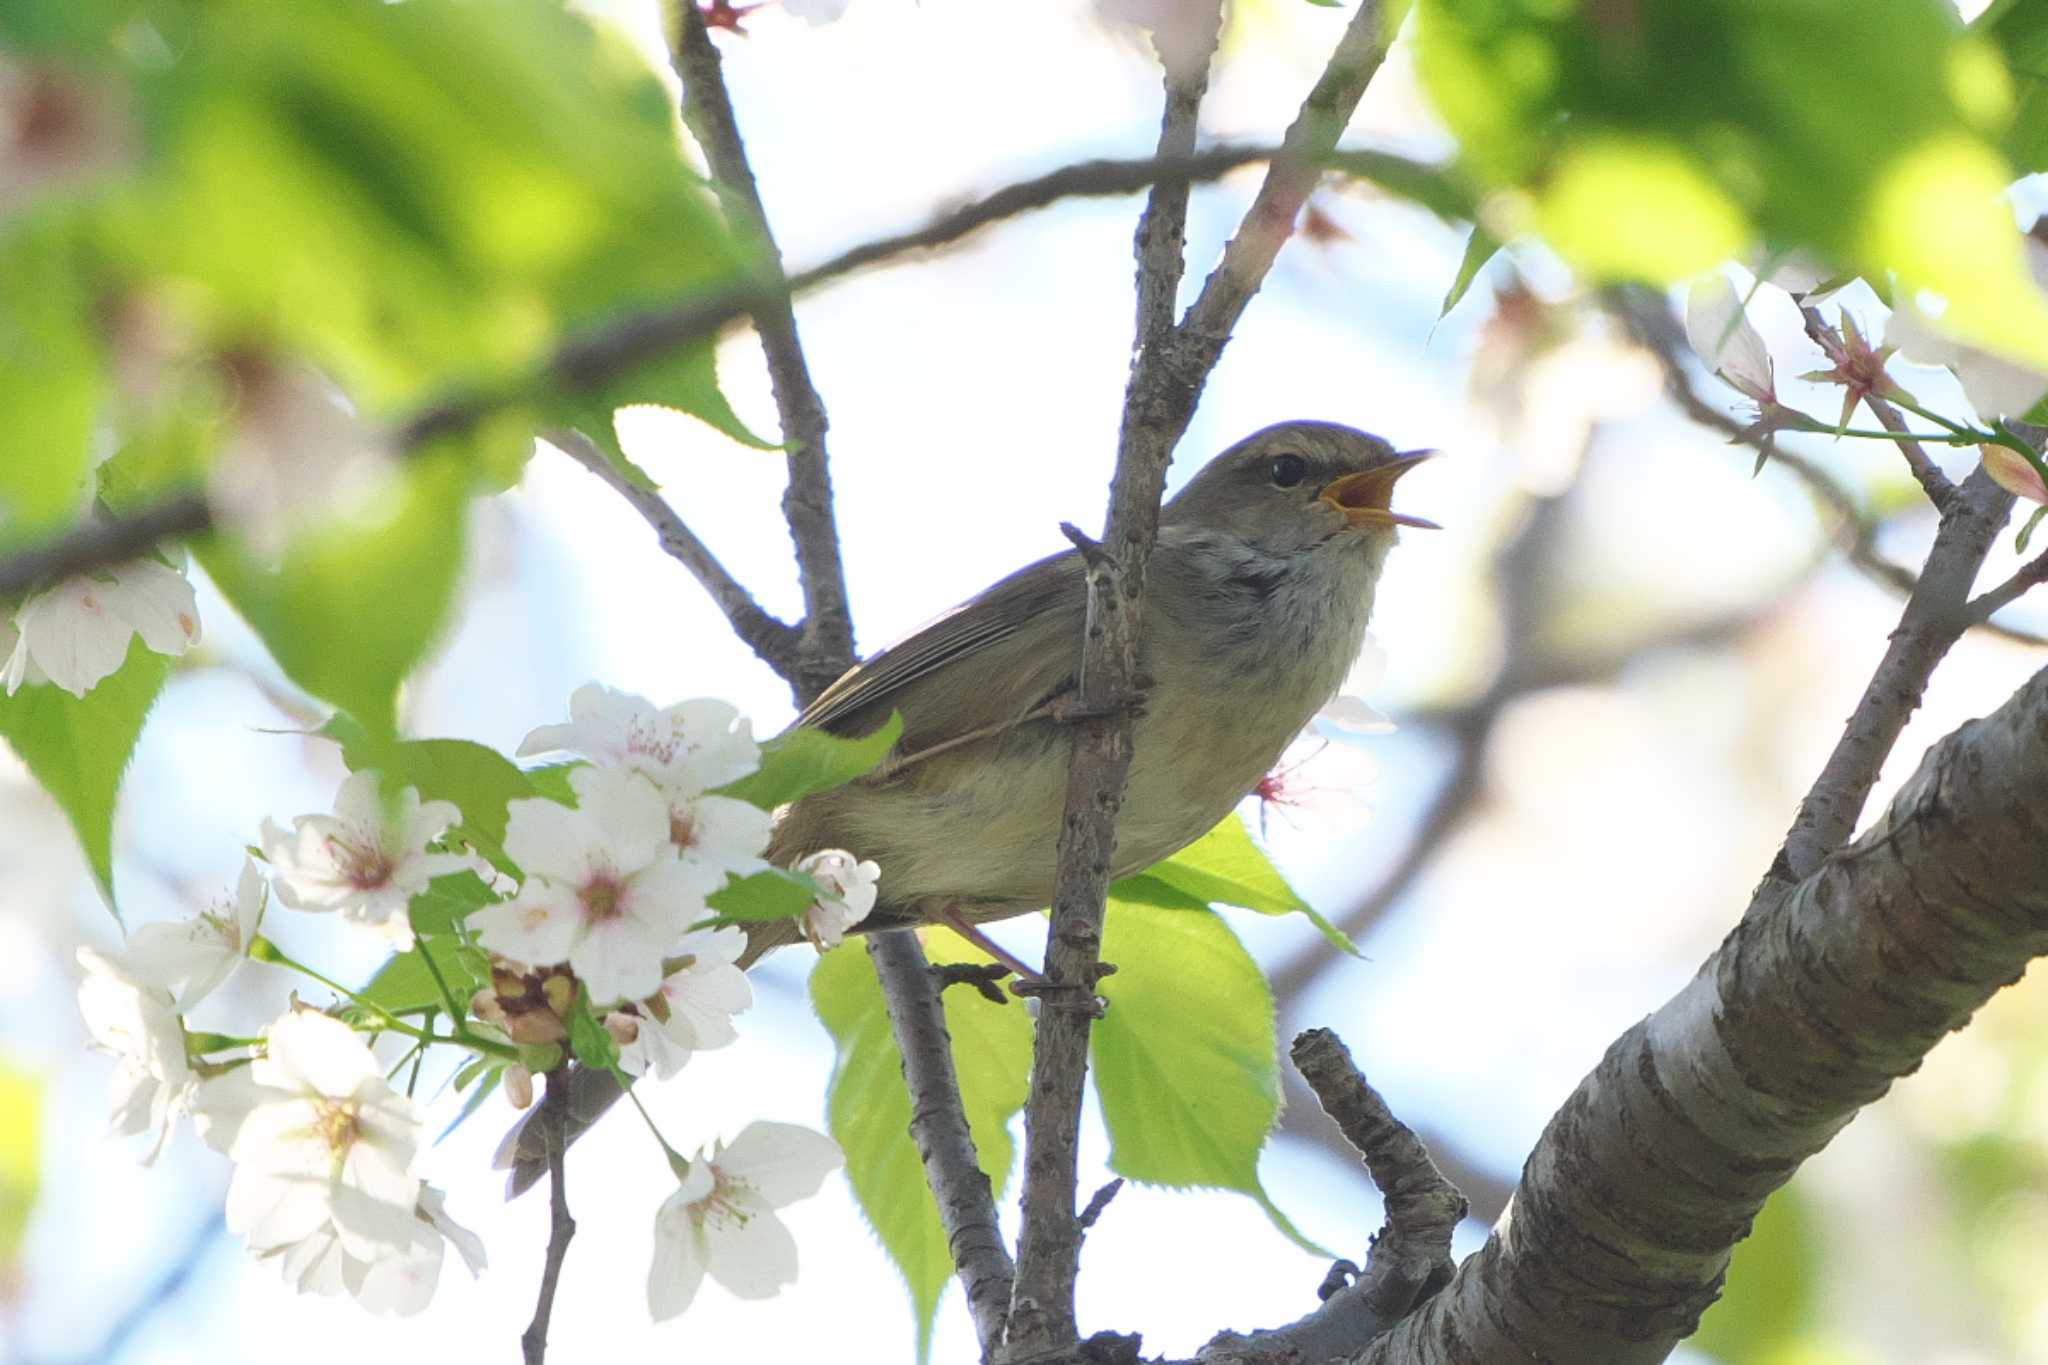 Photo of Japanese Bush Warbler at 横浜自然観察の森 by Y. Watanabe